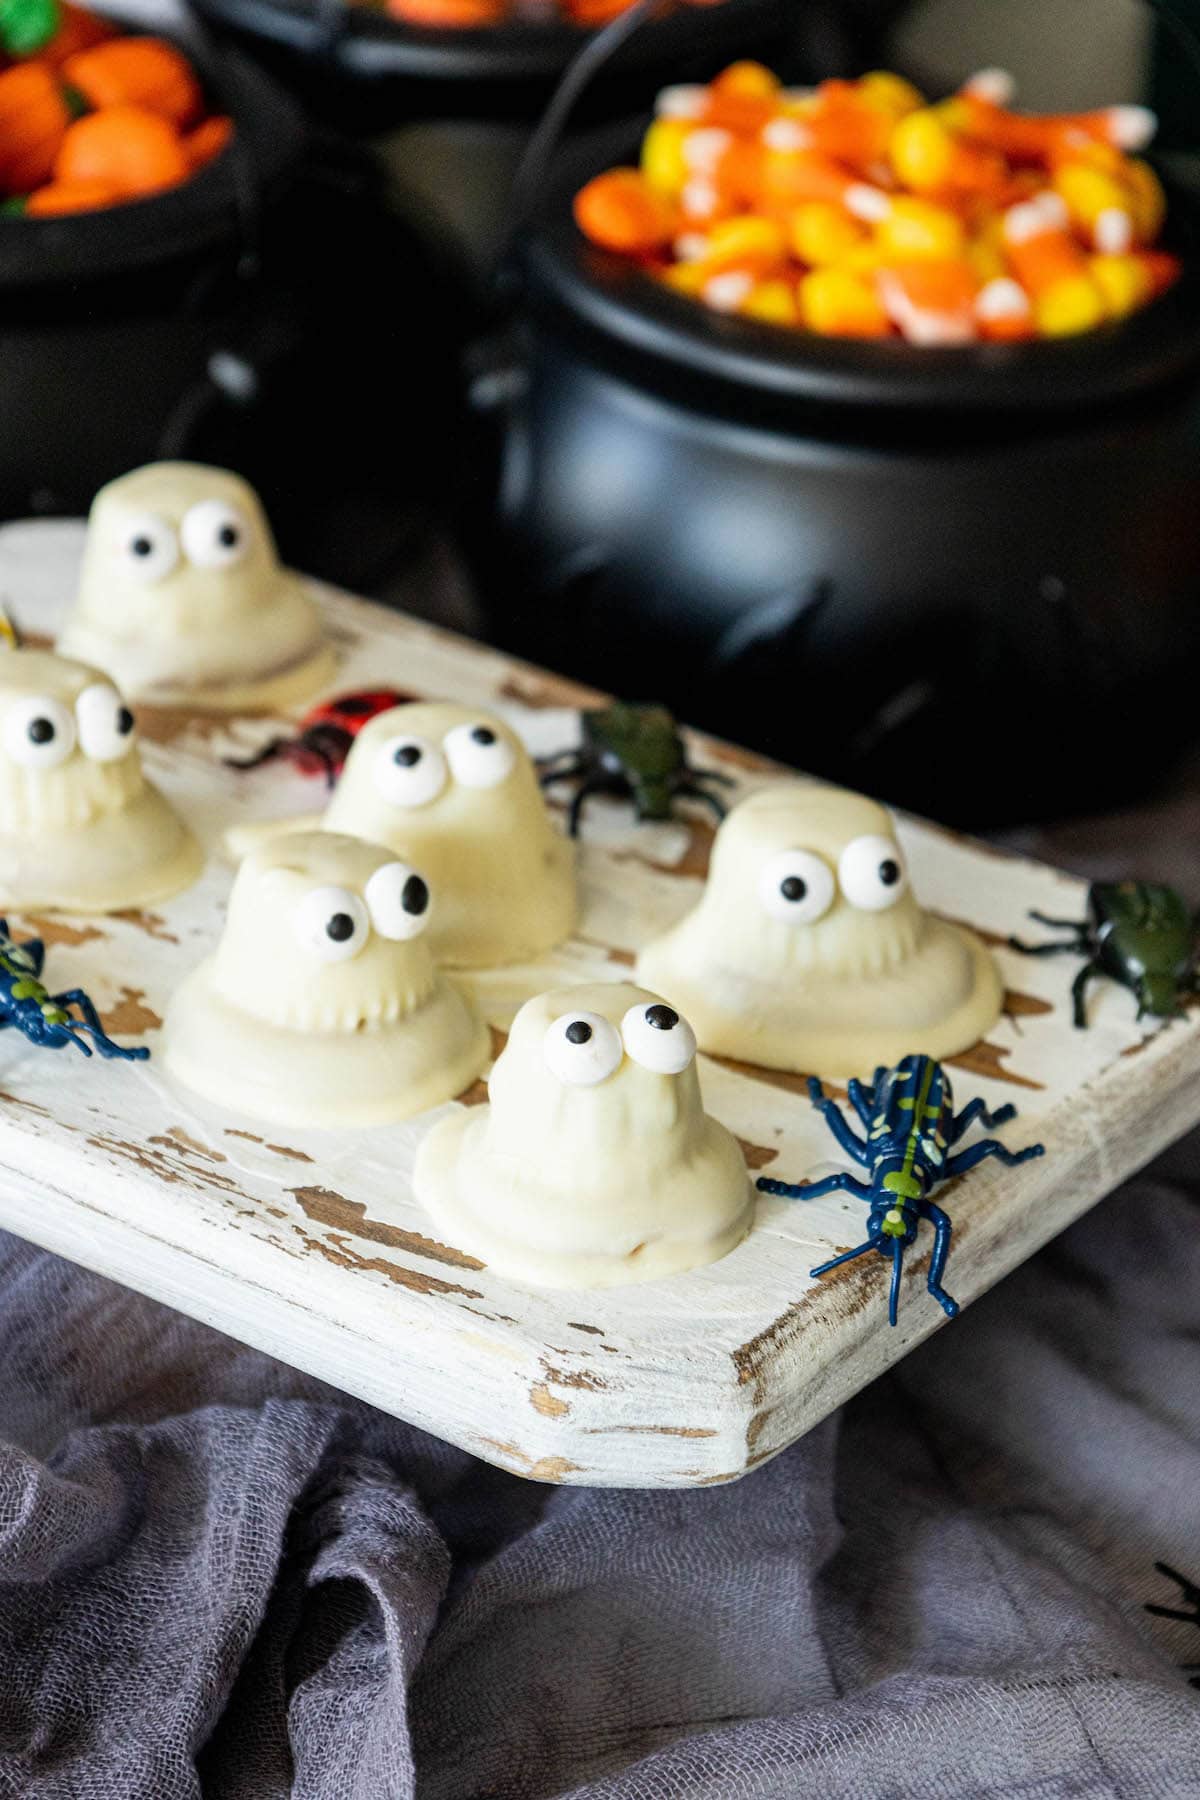 Recipe for white chocolate dipped ghost cookies.